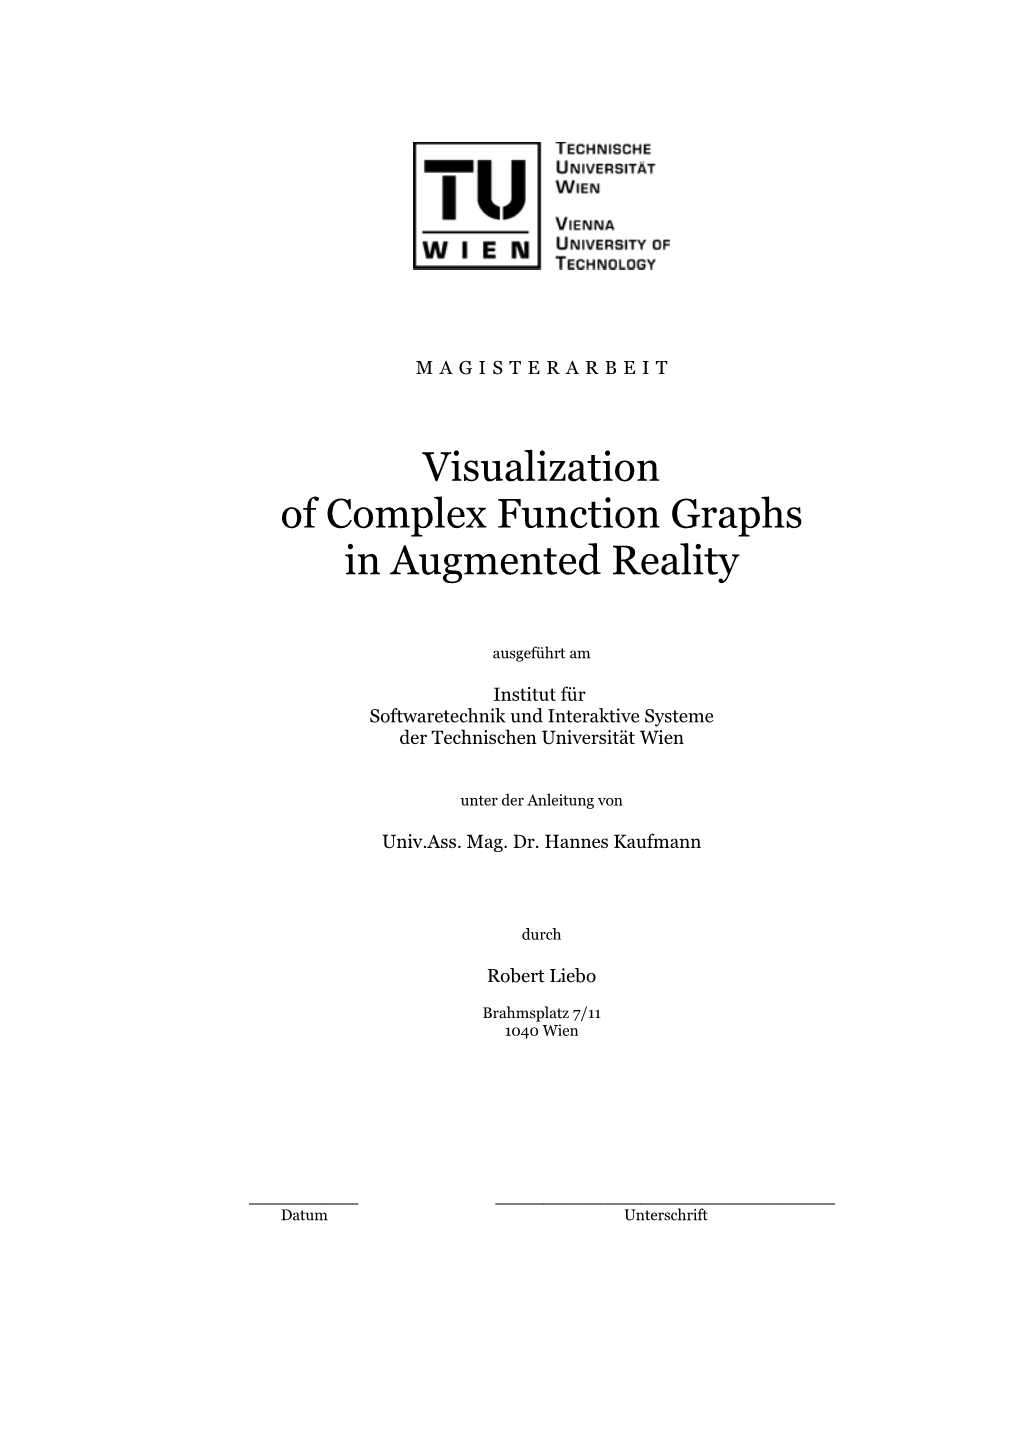 Visualization of Complex Function Graphs in Augmented Reality